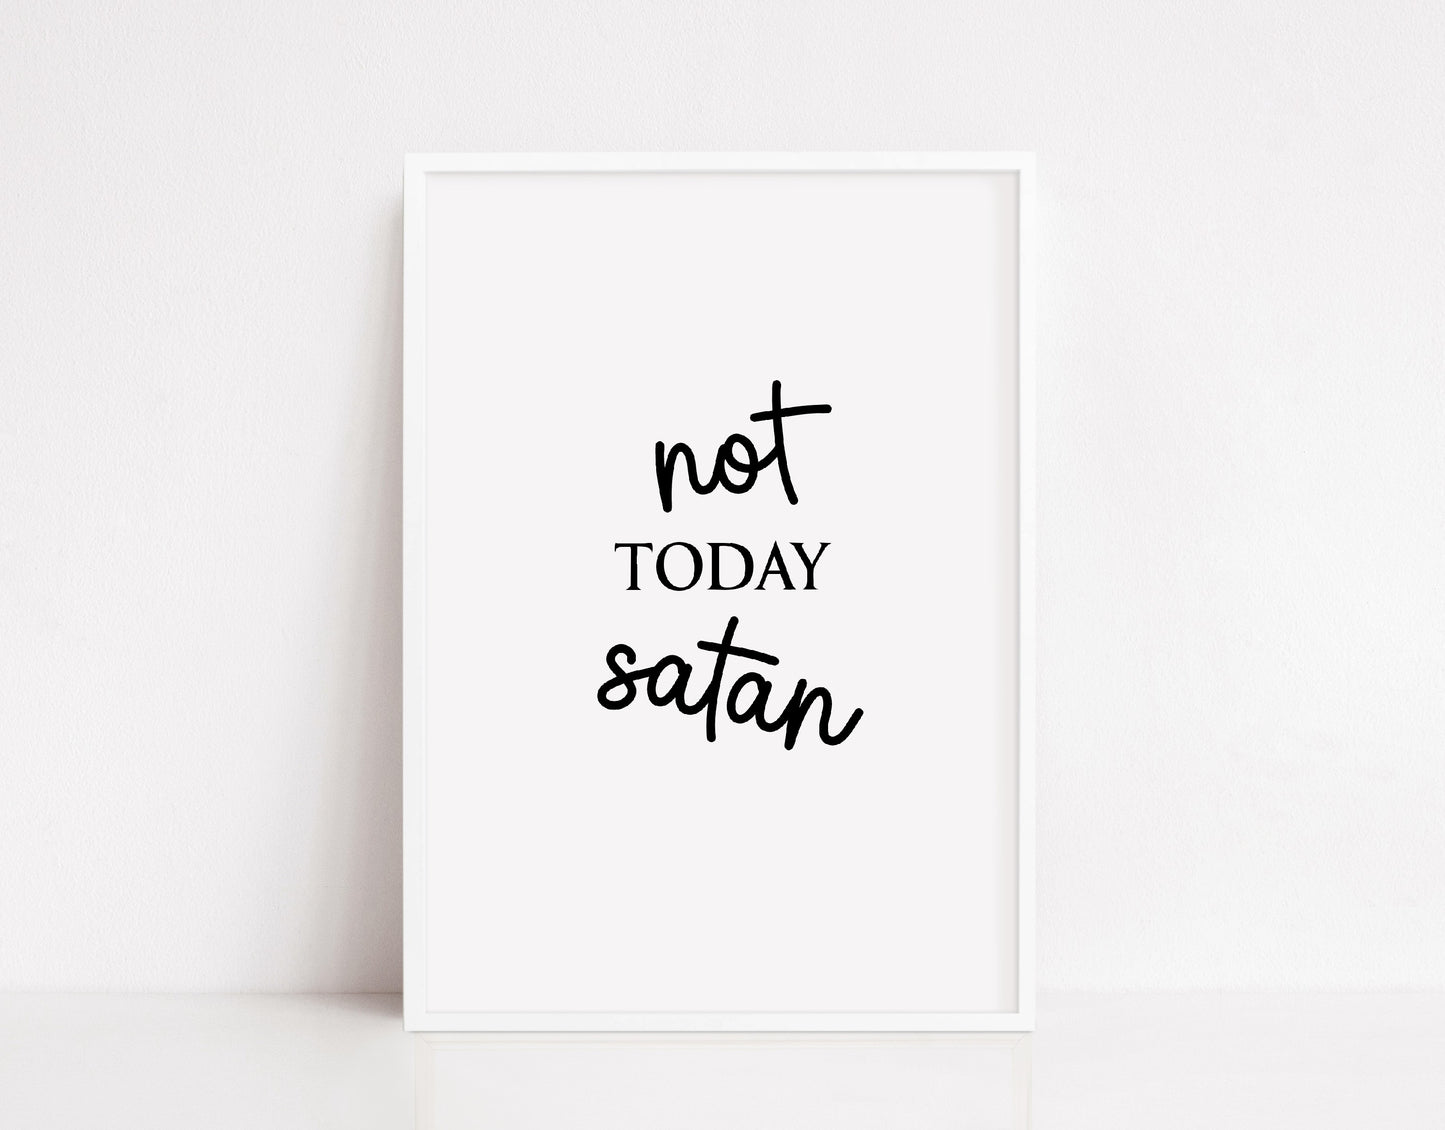 Quote Print | Not Today Satan | Funny Print